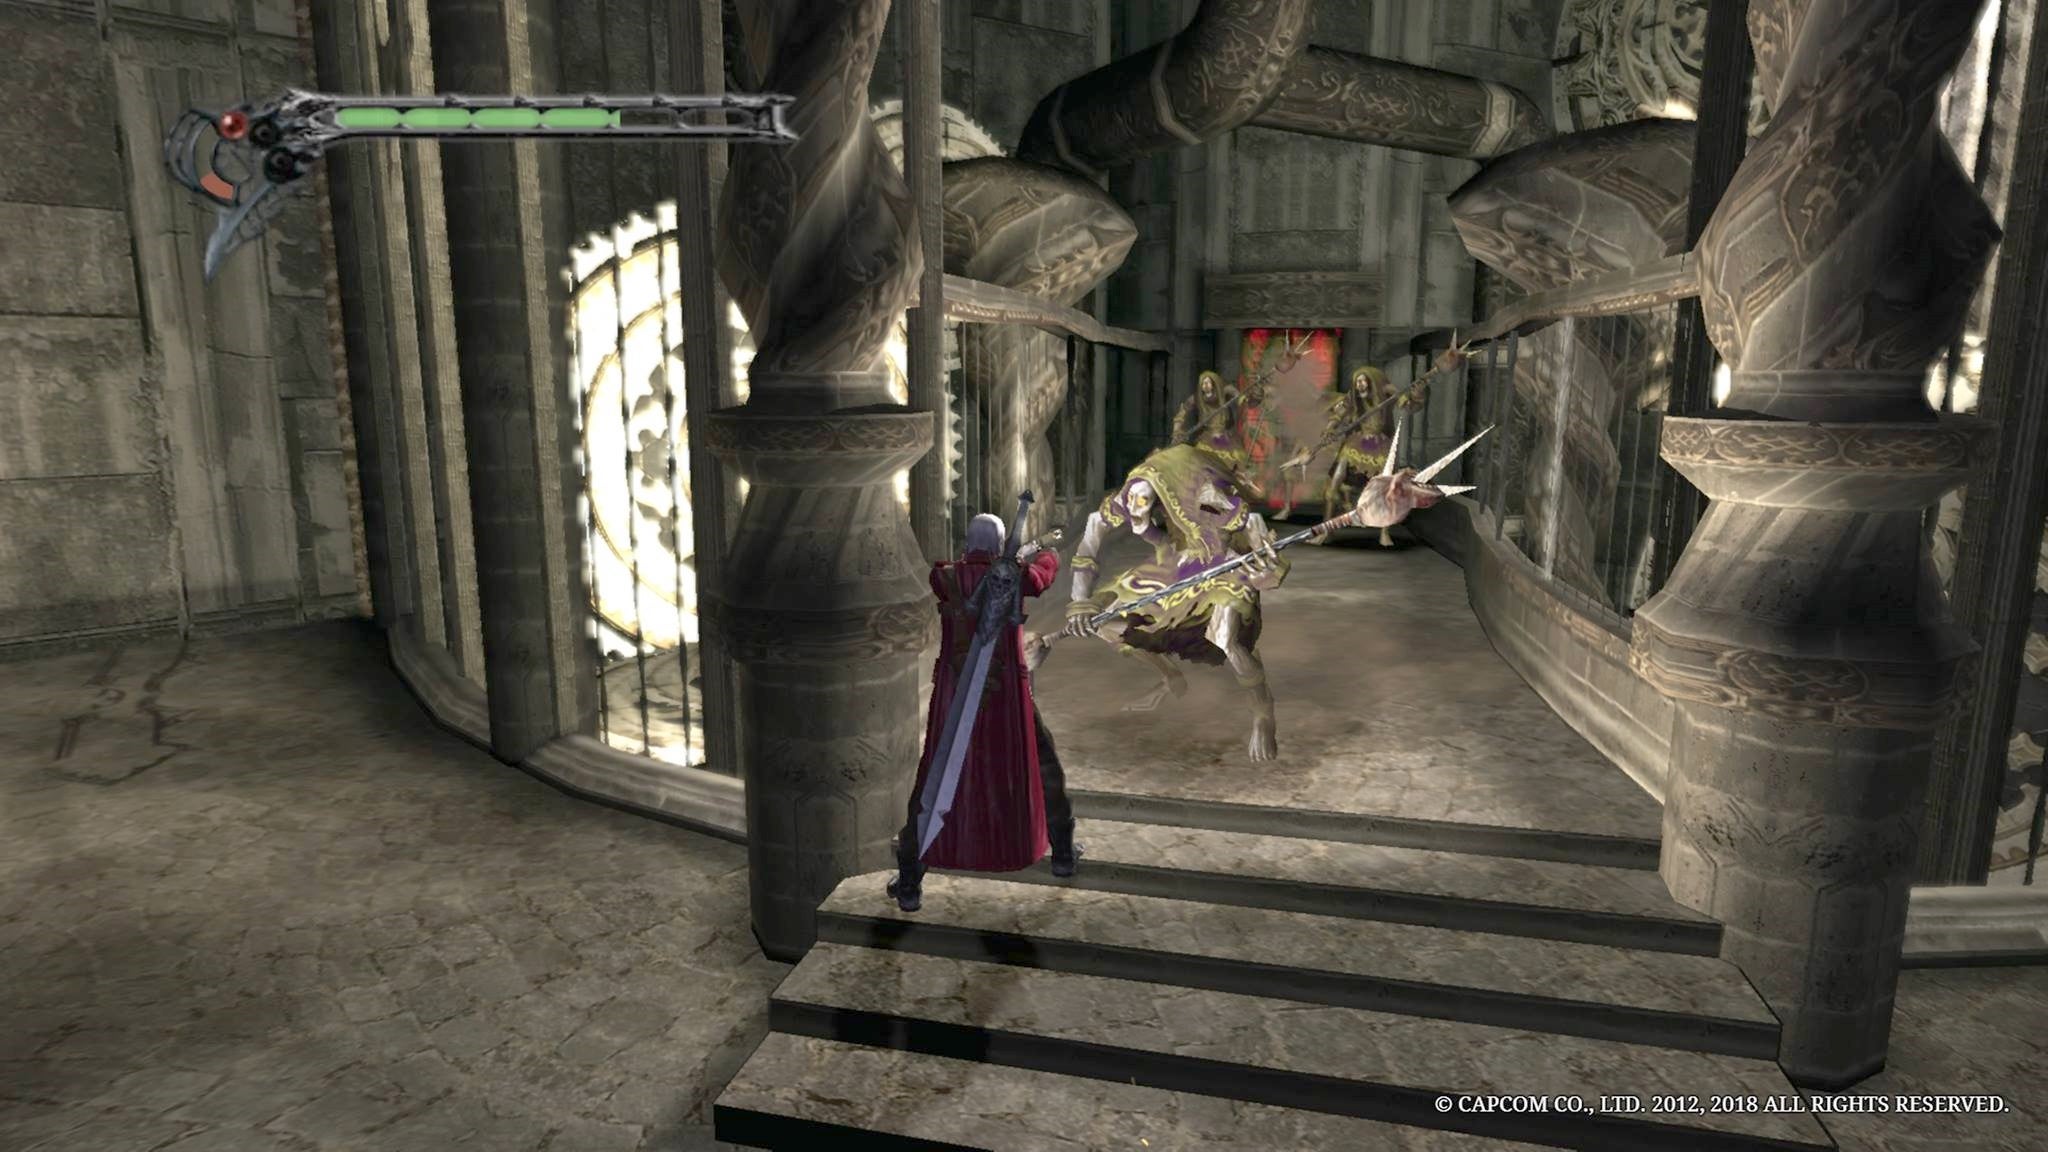 Devil May Cry character battling demons in Gothic setting.